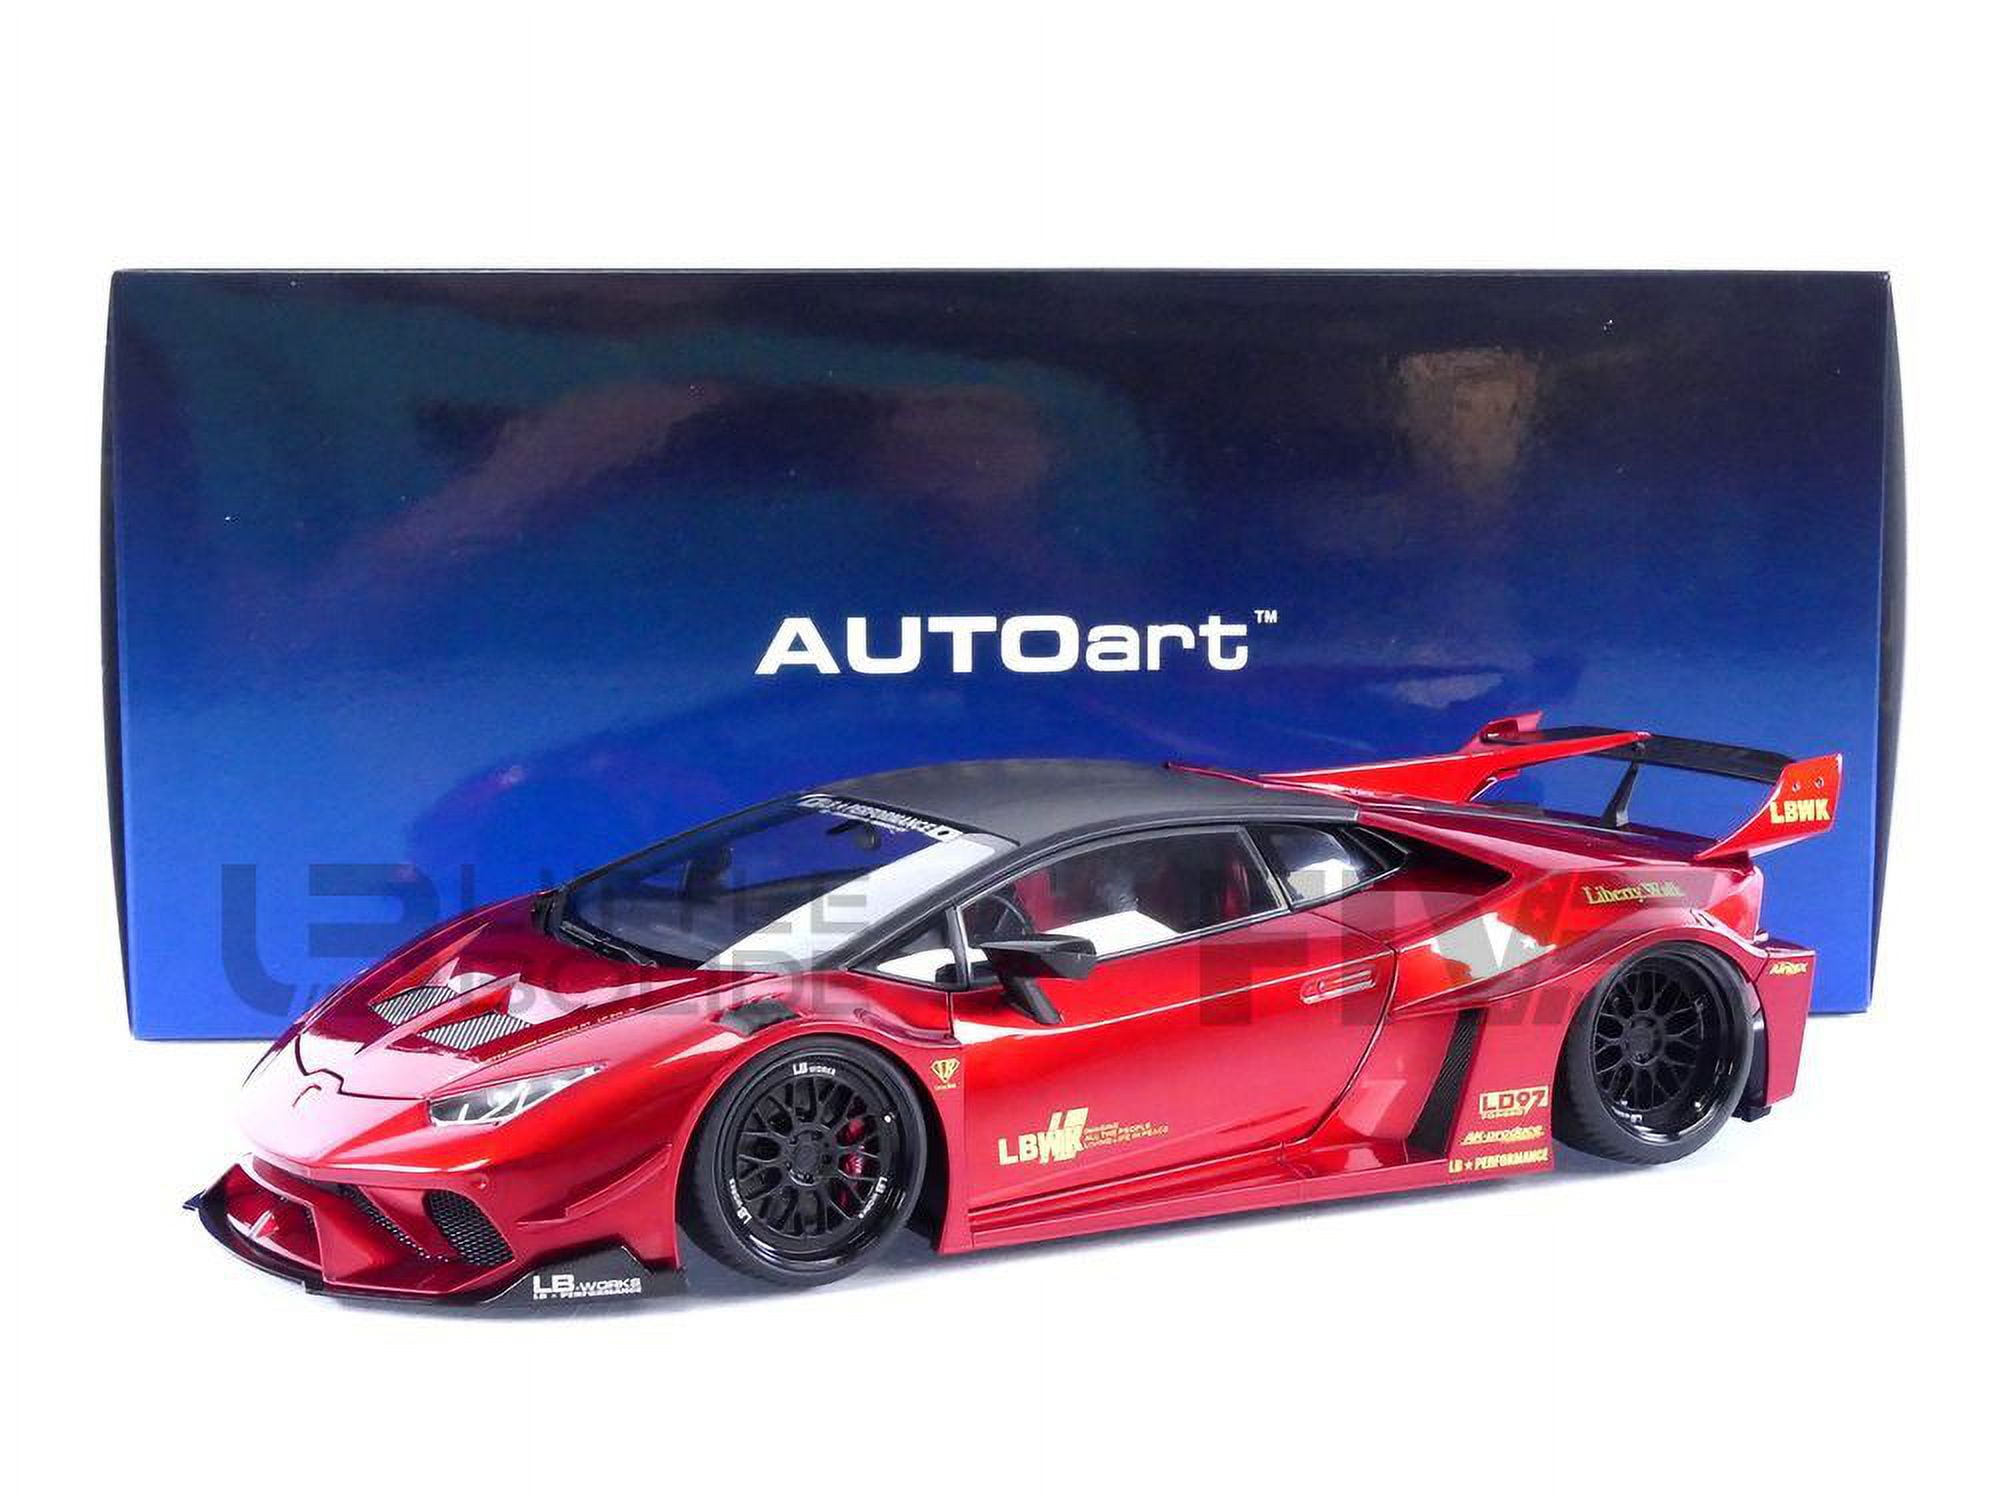 Picture of Autoart 79126 1-18 Scale Lamborghini Huracan GT LB-Silhouette Works Hyper Red Metallic with Black Top Model Car